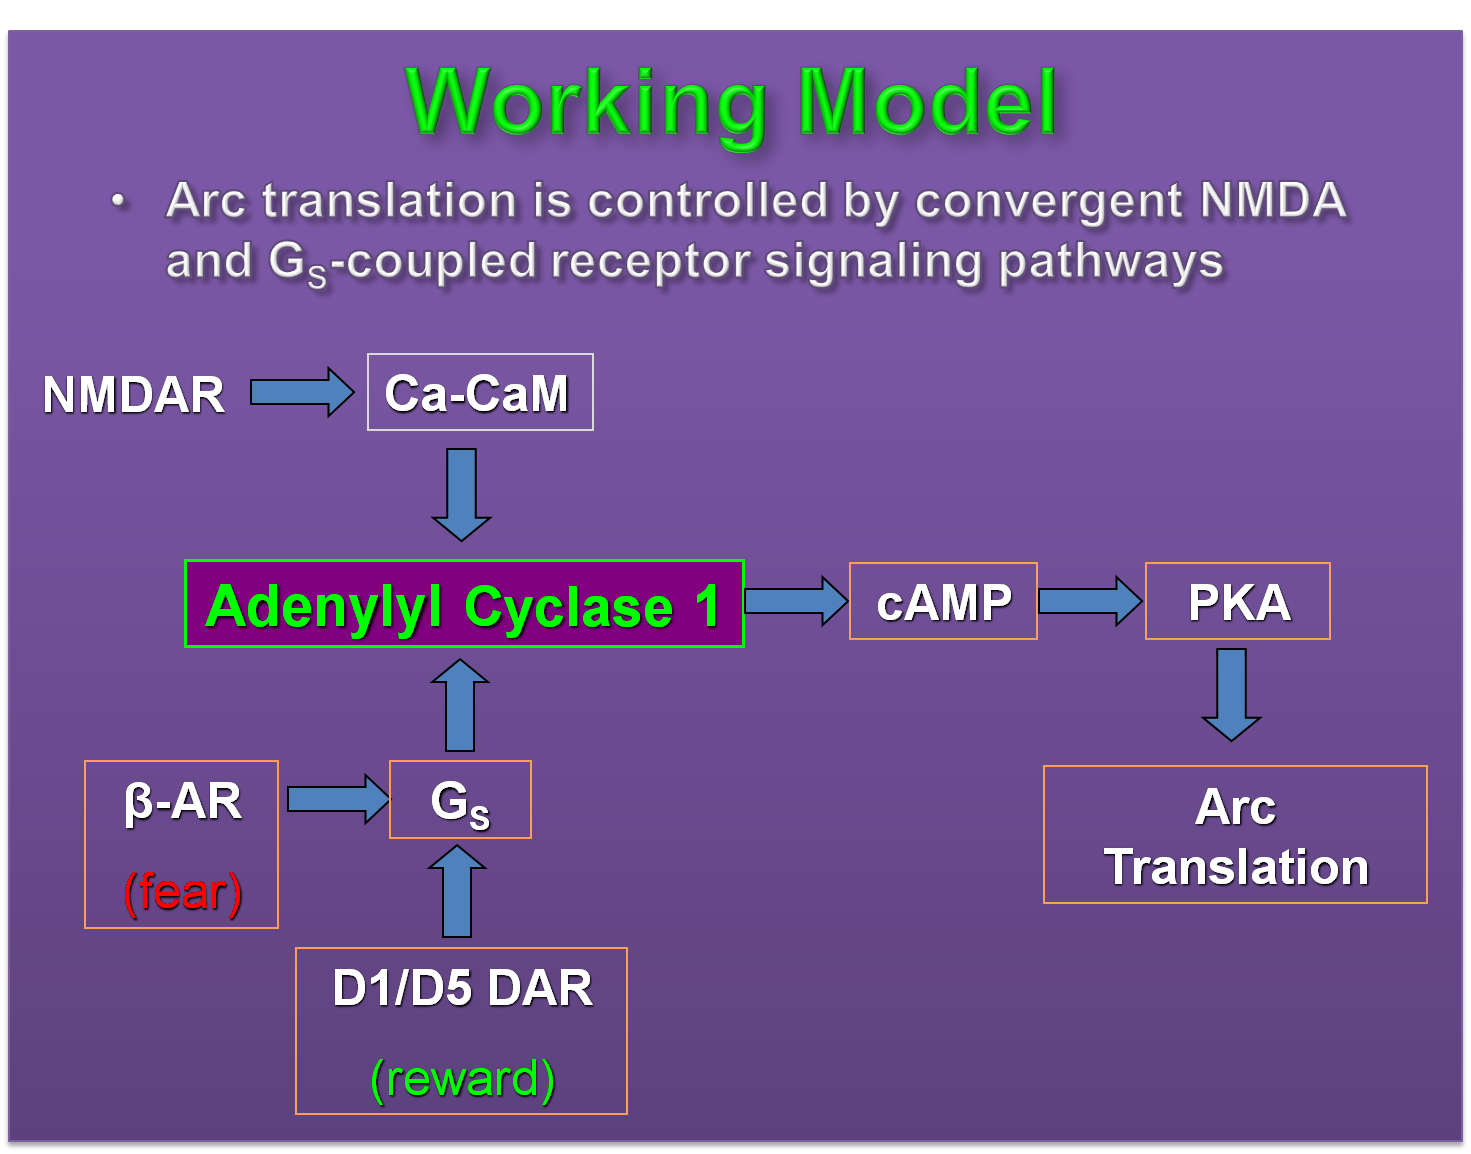 Working model for NMDA receptor regulation of Arc expression: Adenylyl cyclase 1 is conicidence detector